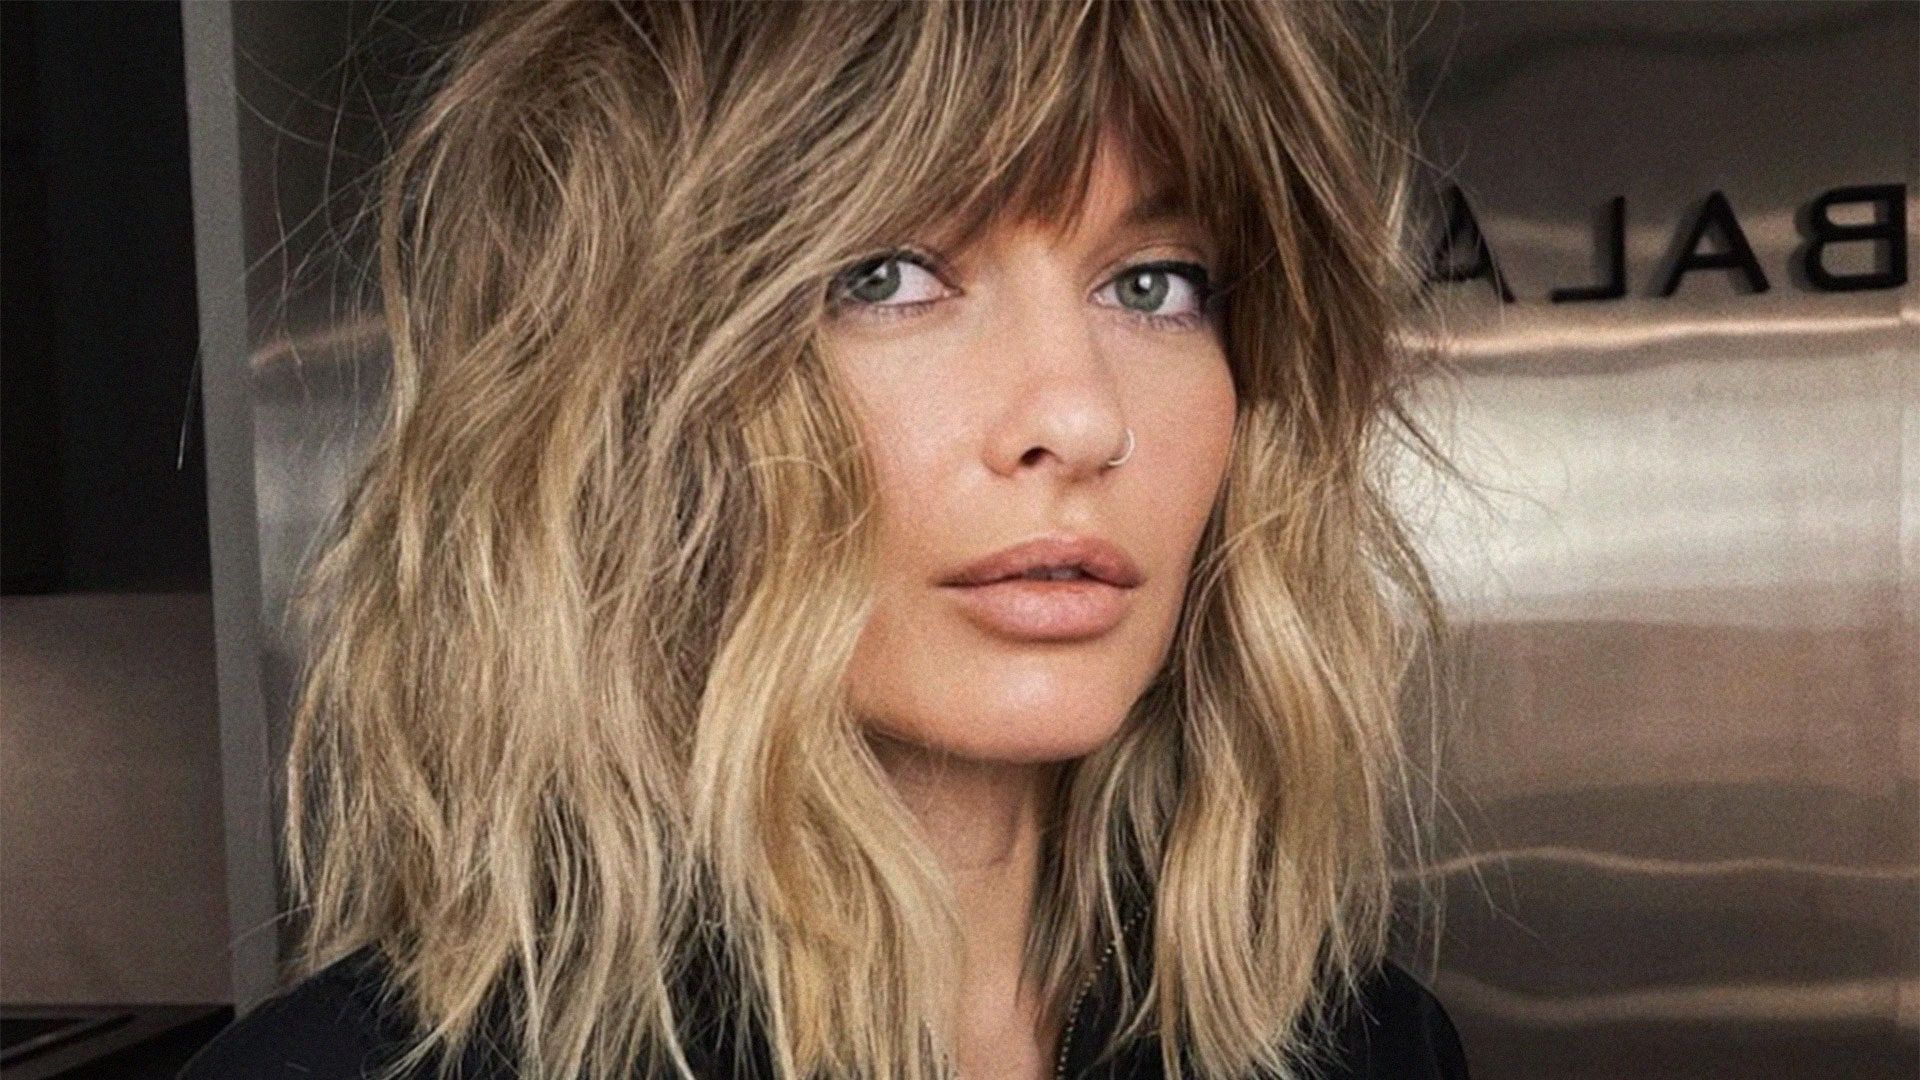 Rebel Texture Hair Will Be Everywhere This Autumn & There's So Many Ways To  Wear It | Glamour Uk With Recent Dip Dye Medium Layered Hair With Bangs (View 18 of 18)